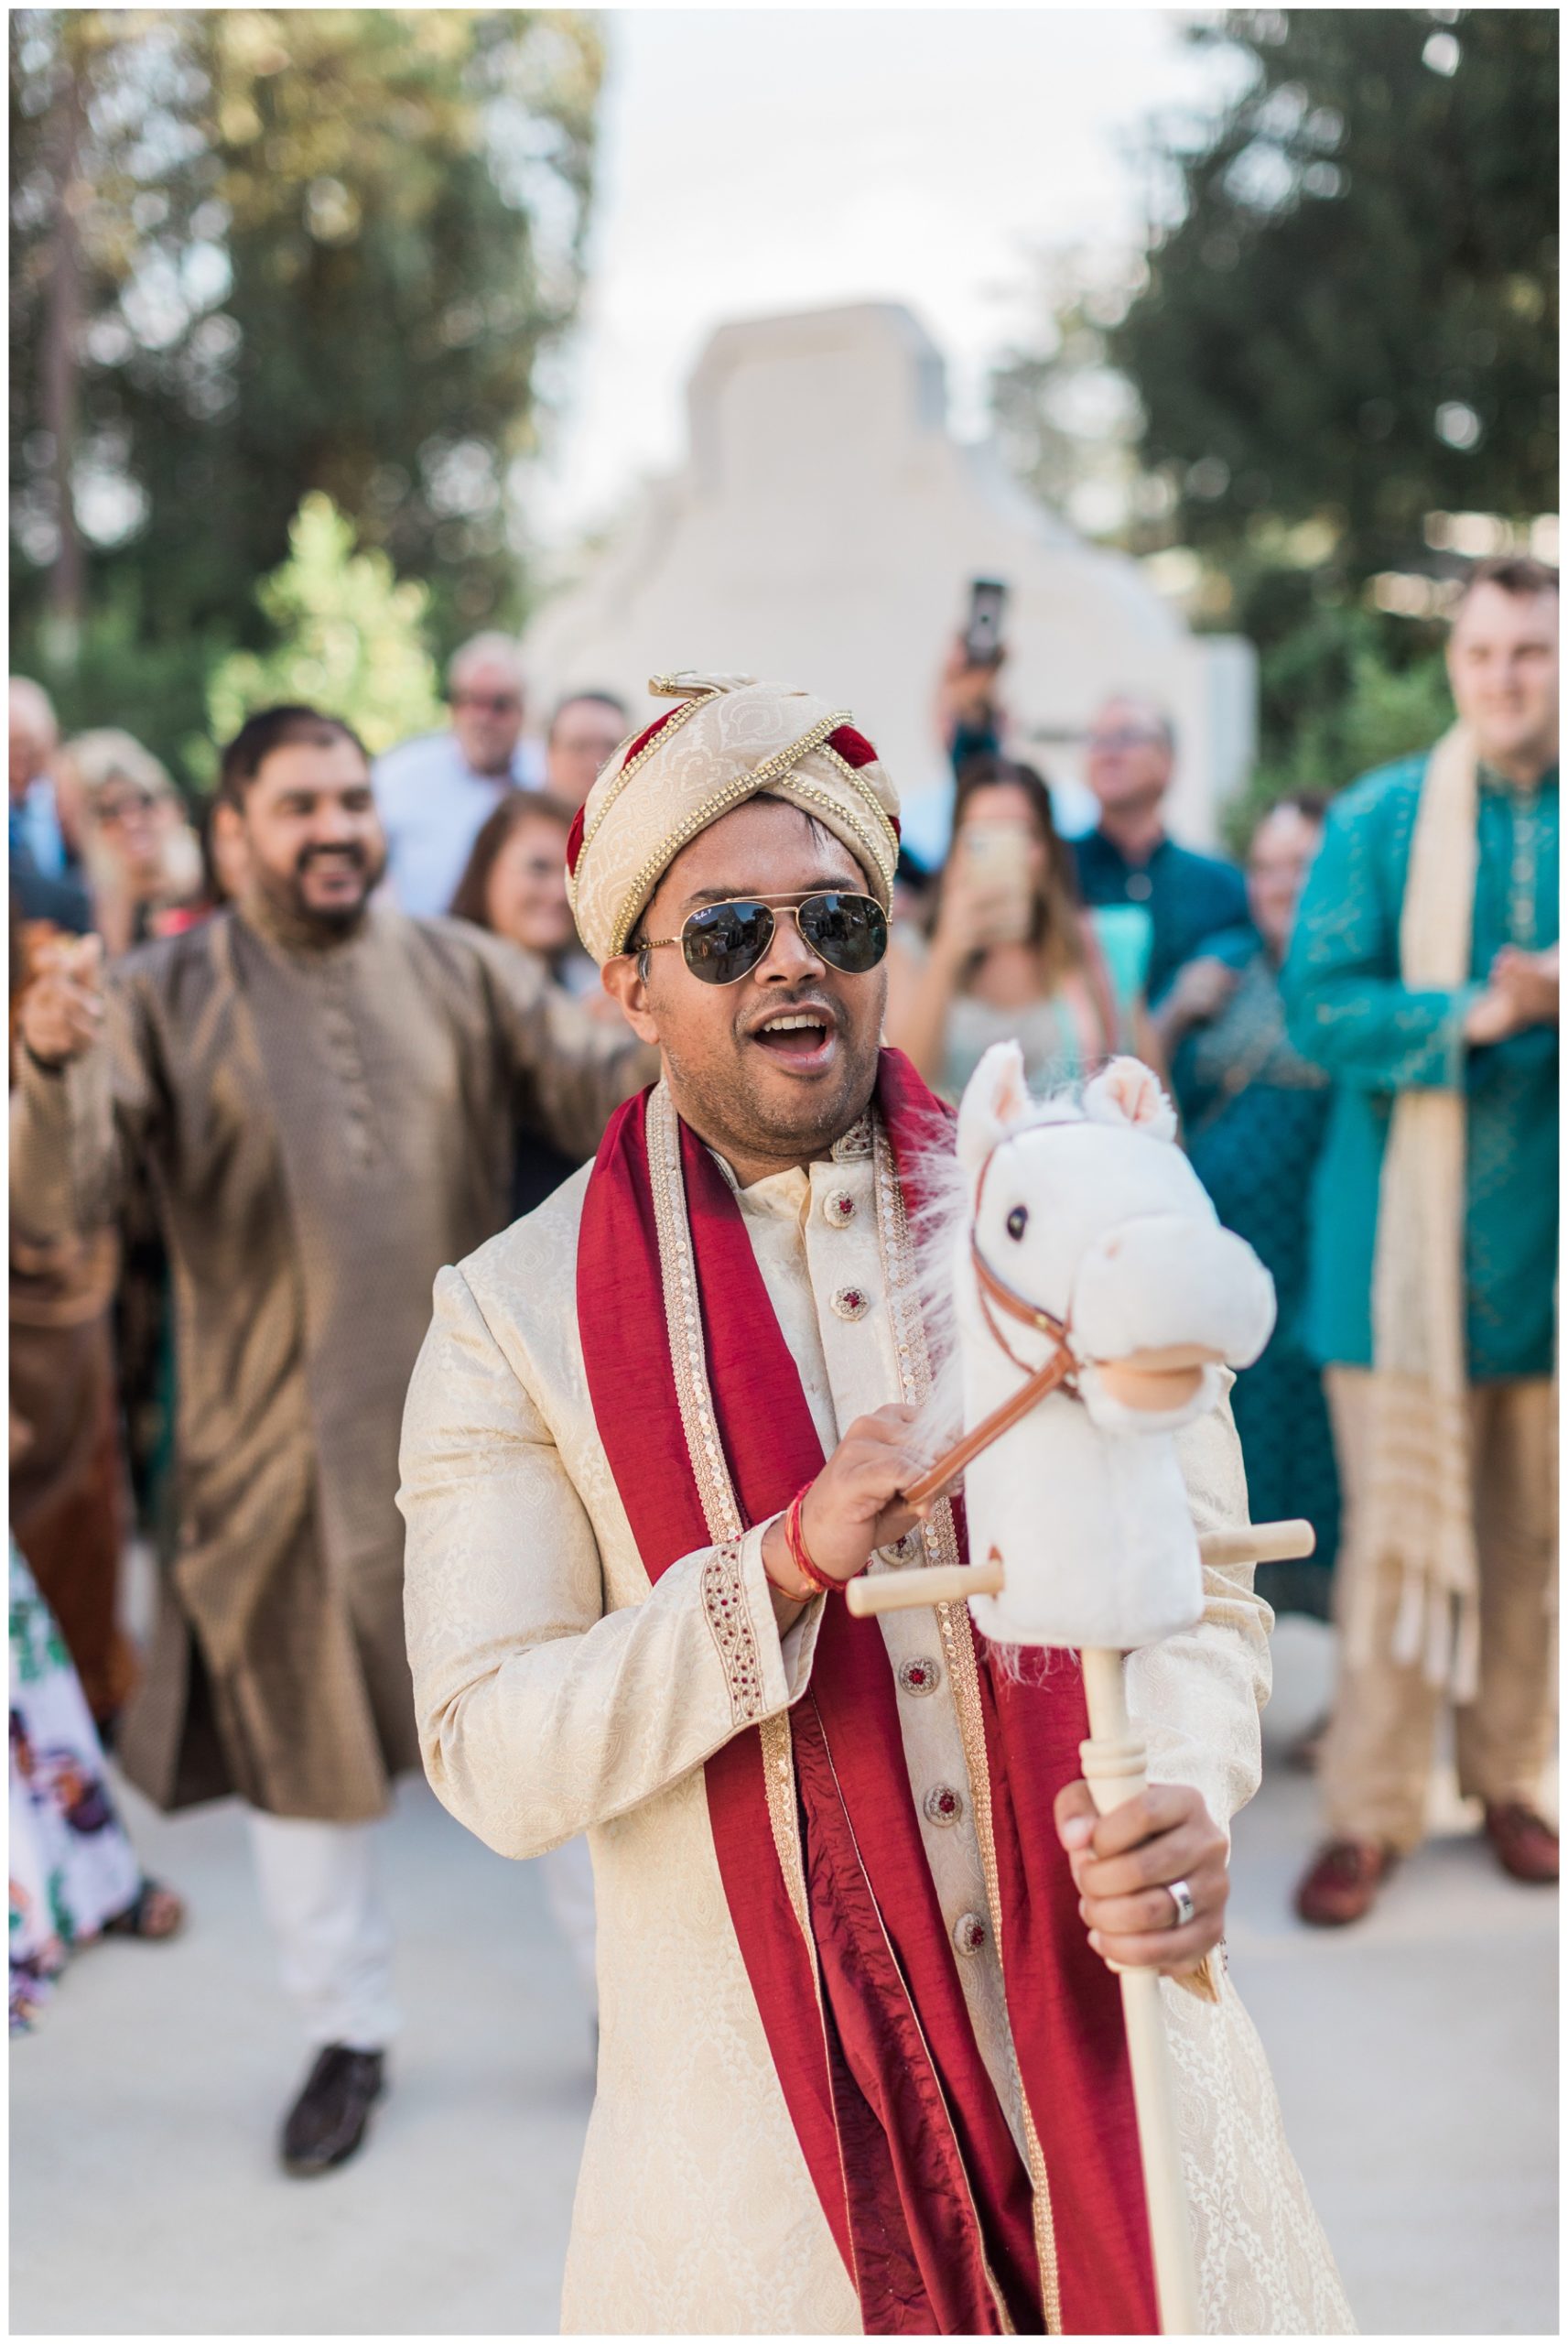 Baraat procession before a traditional Indian wedding ceremony at The Peach Orchard